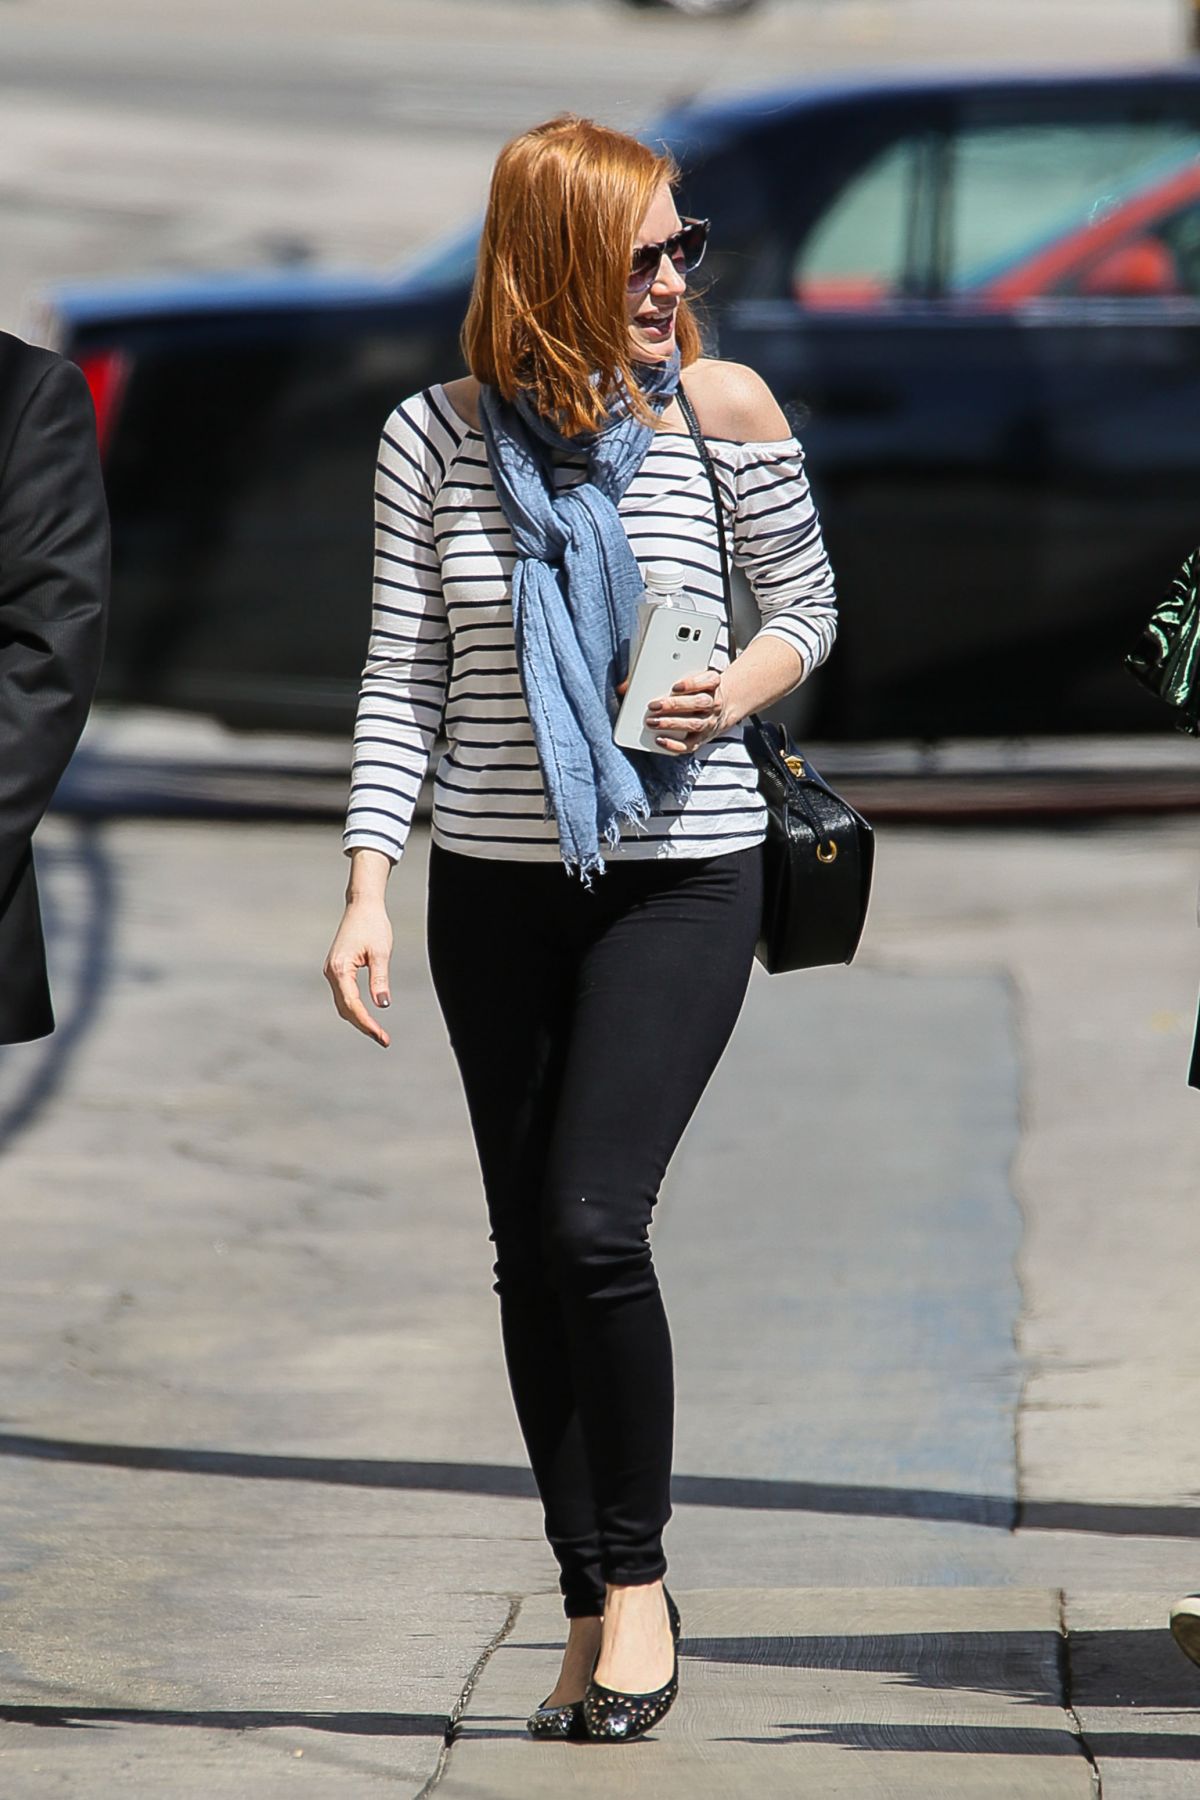 jessica-chastain-arrives-and-leaves-jimmy-kimmel-live-in-hollywood-04-20-10...